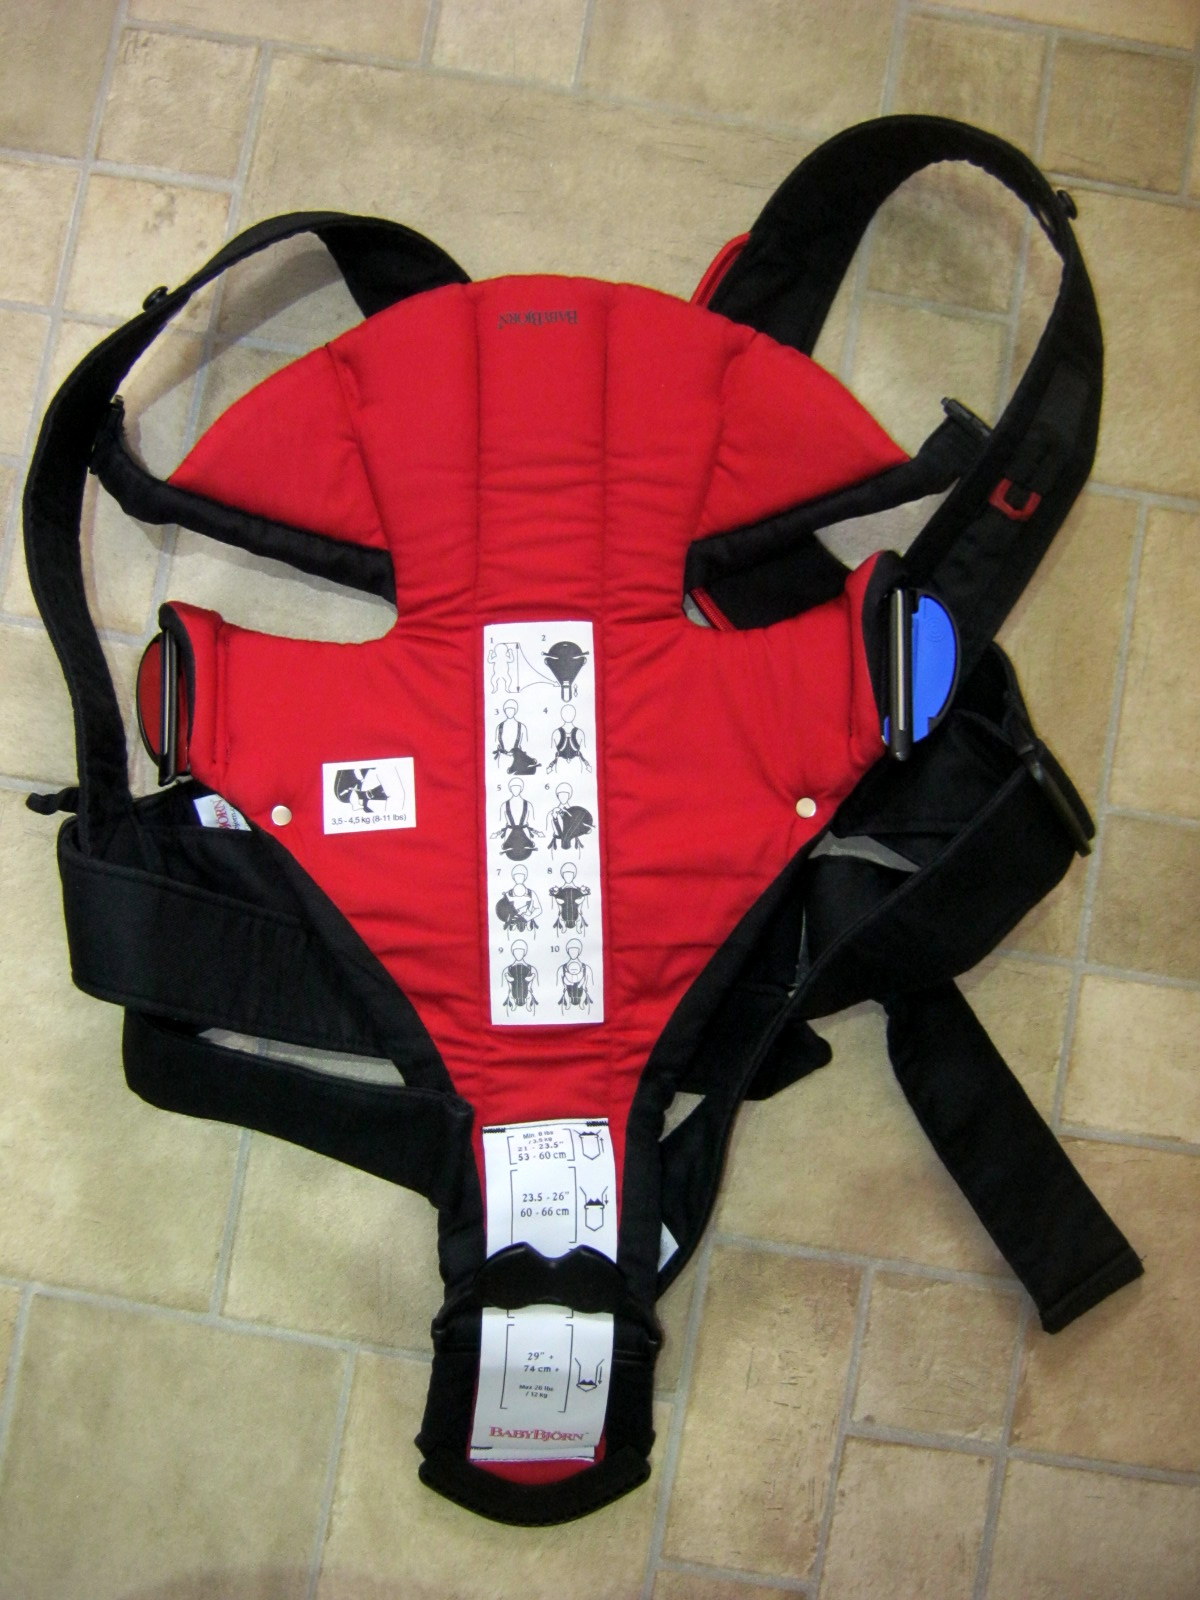 babybjorn active baby carrier review